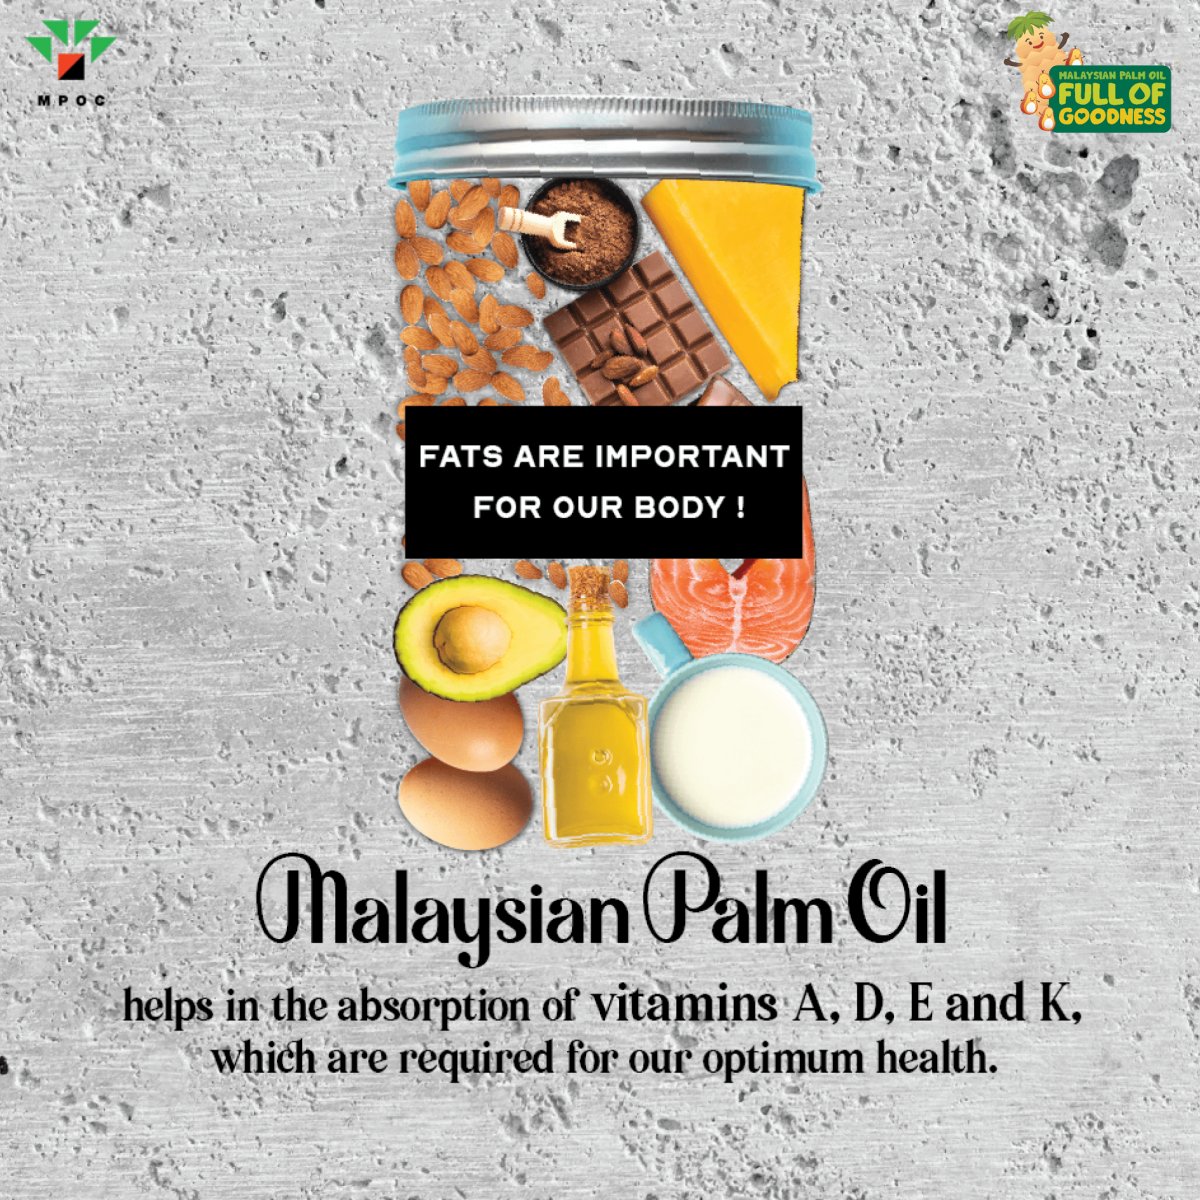 #MalaysianPalmOil helps in the absorption of Vitamins A, D, E, and K. All of these #vitamins are required for our optimum health.

#MSPO #FullOfGoodness #minyaksawit #sawit #mampan #sustainable #sustainability #VitaminA #VitaminD #VitaminE #VitaminK #optimumhealth #stayhealthy https://t.co/ZljHgGsduF